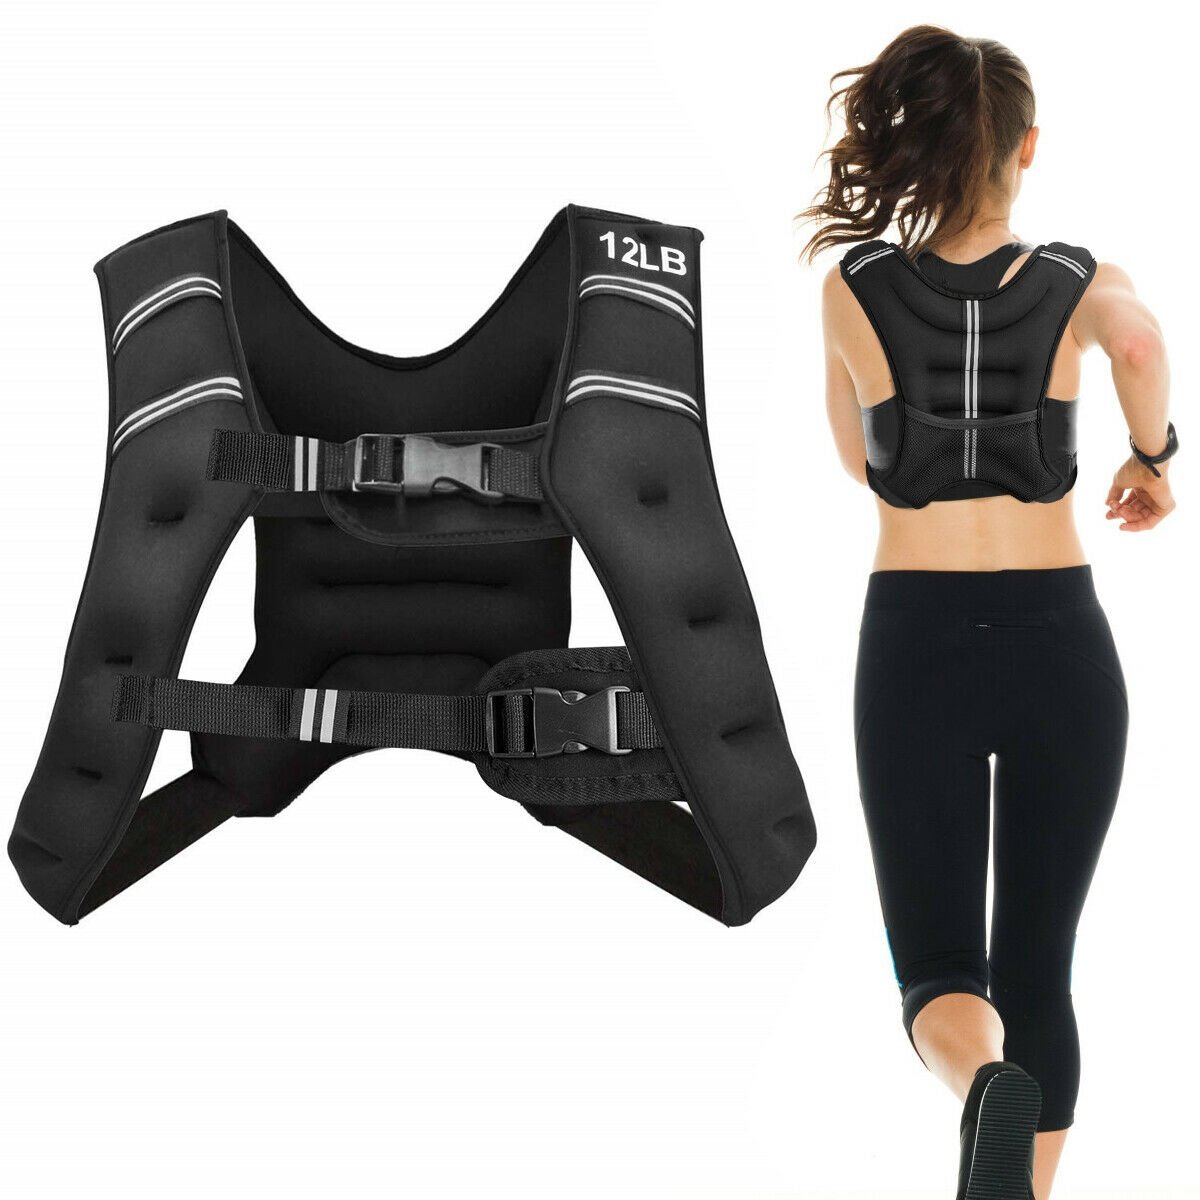 Training Weight Vest Workout Equipment with Adjustable Buckles and Mesh Bag-12 lbs, Black at Gallery Canada